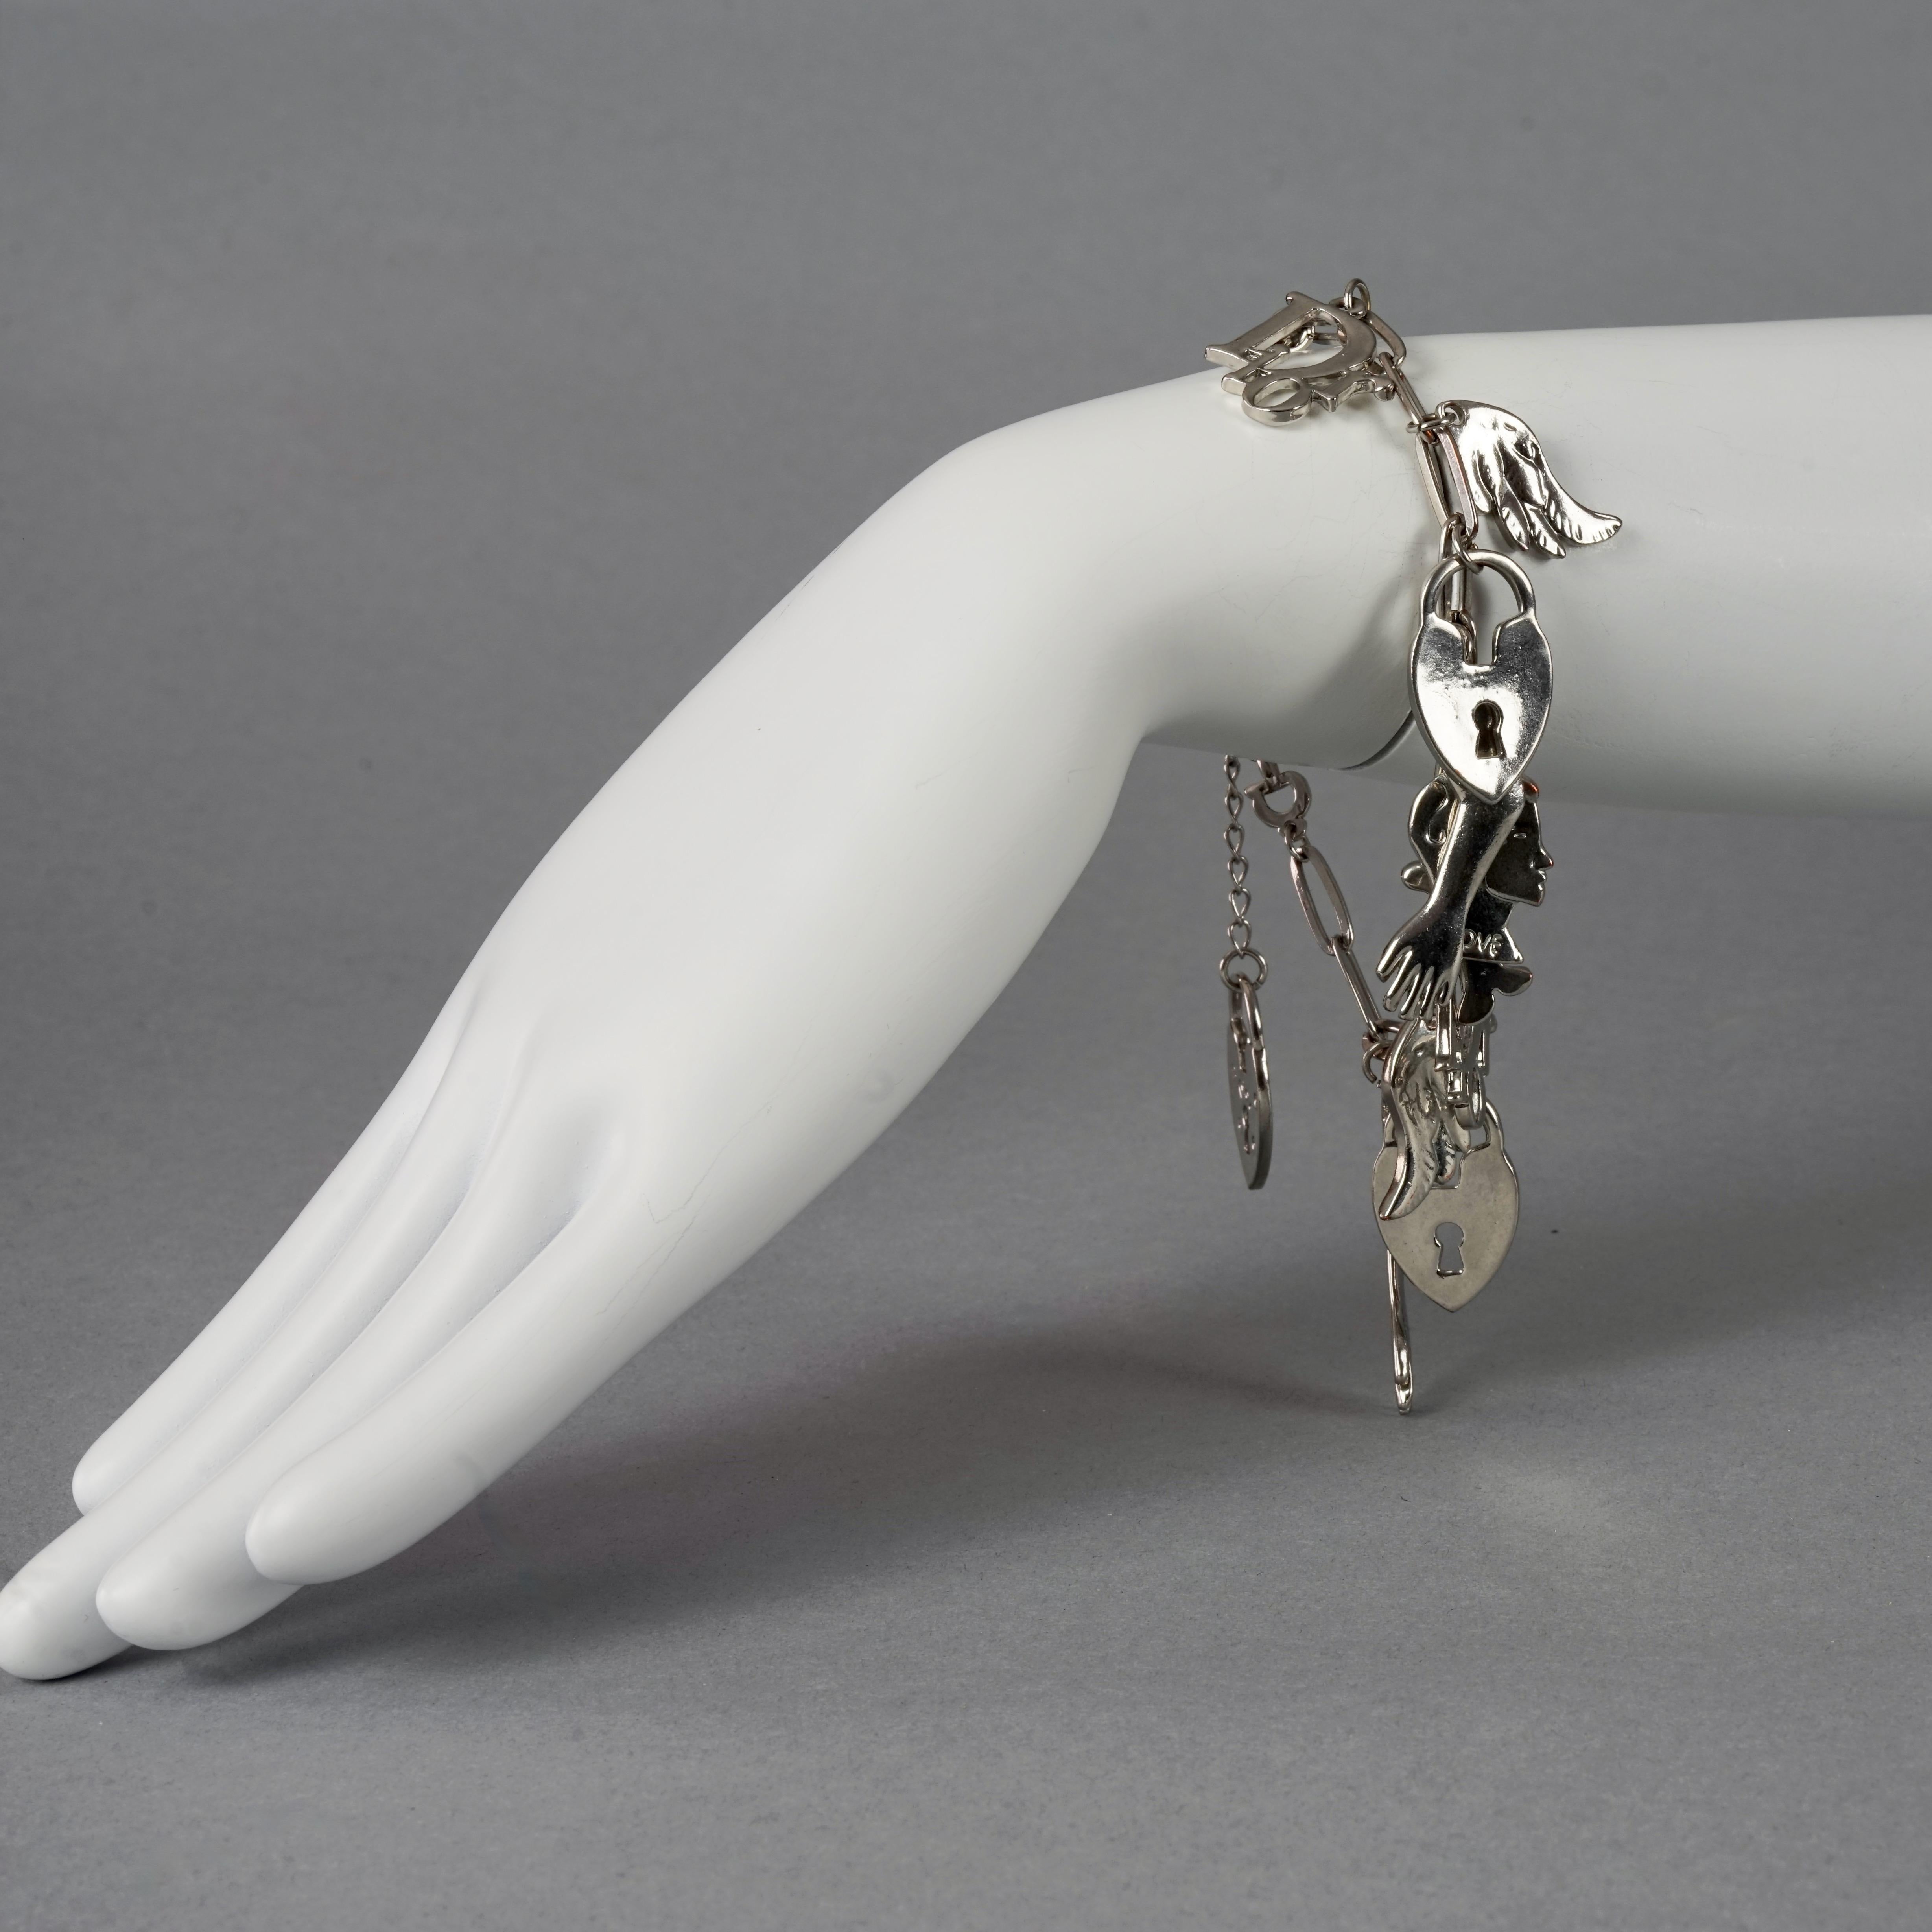 Vintage CHRISTIAN DIOR by GALLIANO Figural Charm Silver Bracelet

Measurements:
Height: 1.77 inches (4.5 cm)
Total Wearable Length: 9.84 inches (25 cm) adjustable

Features:
- 100% Authentic CHRISTIAN DIOR by John Galliano.
- Chain bracelet with